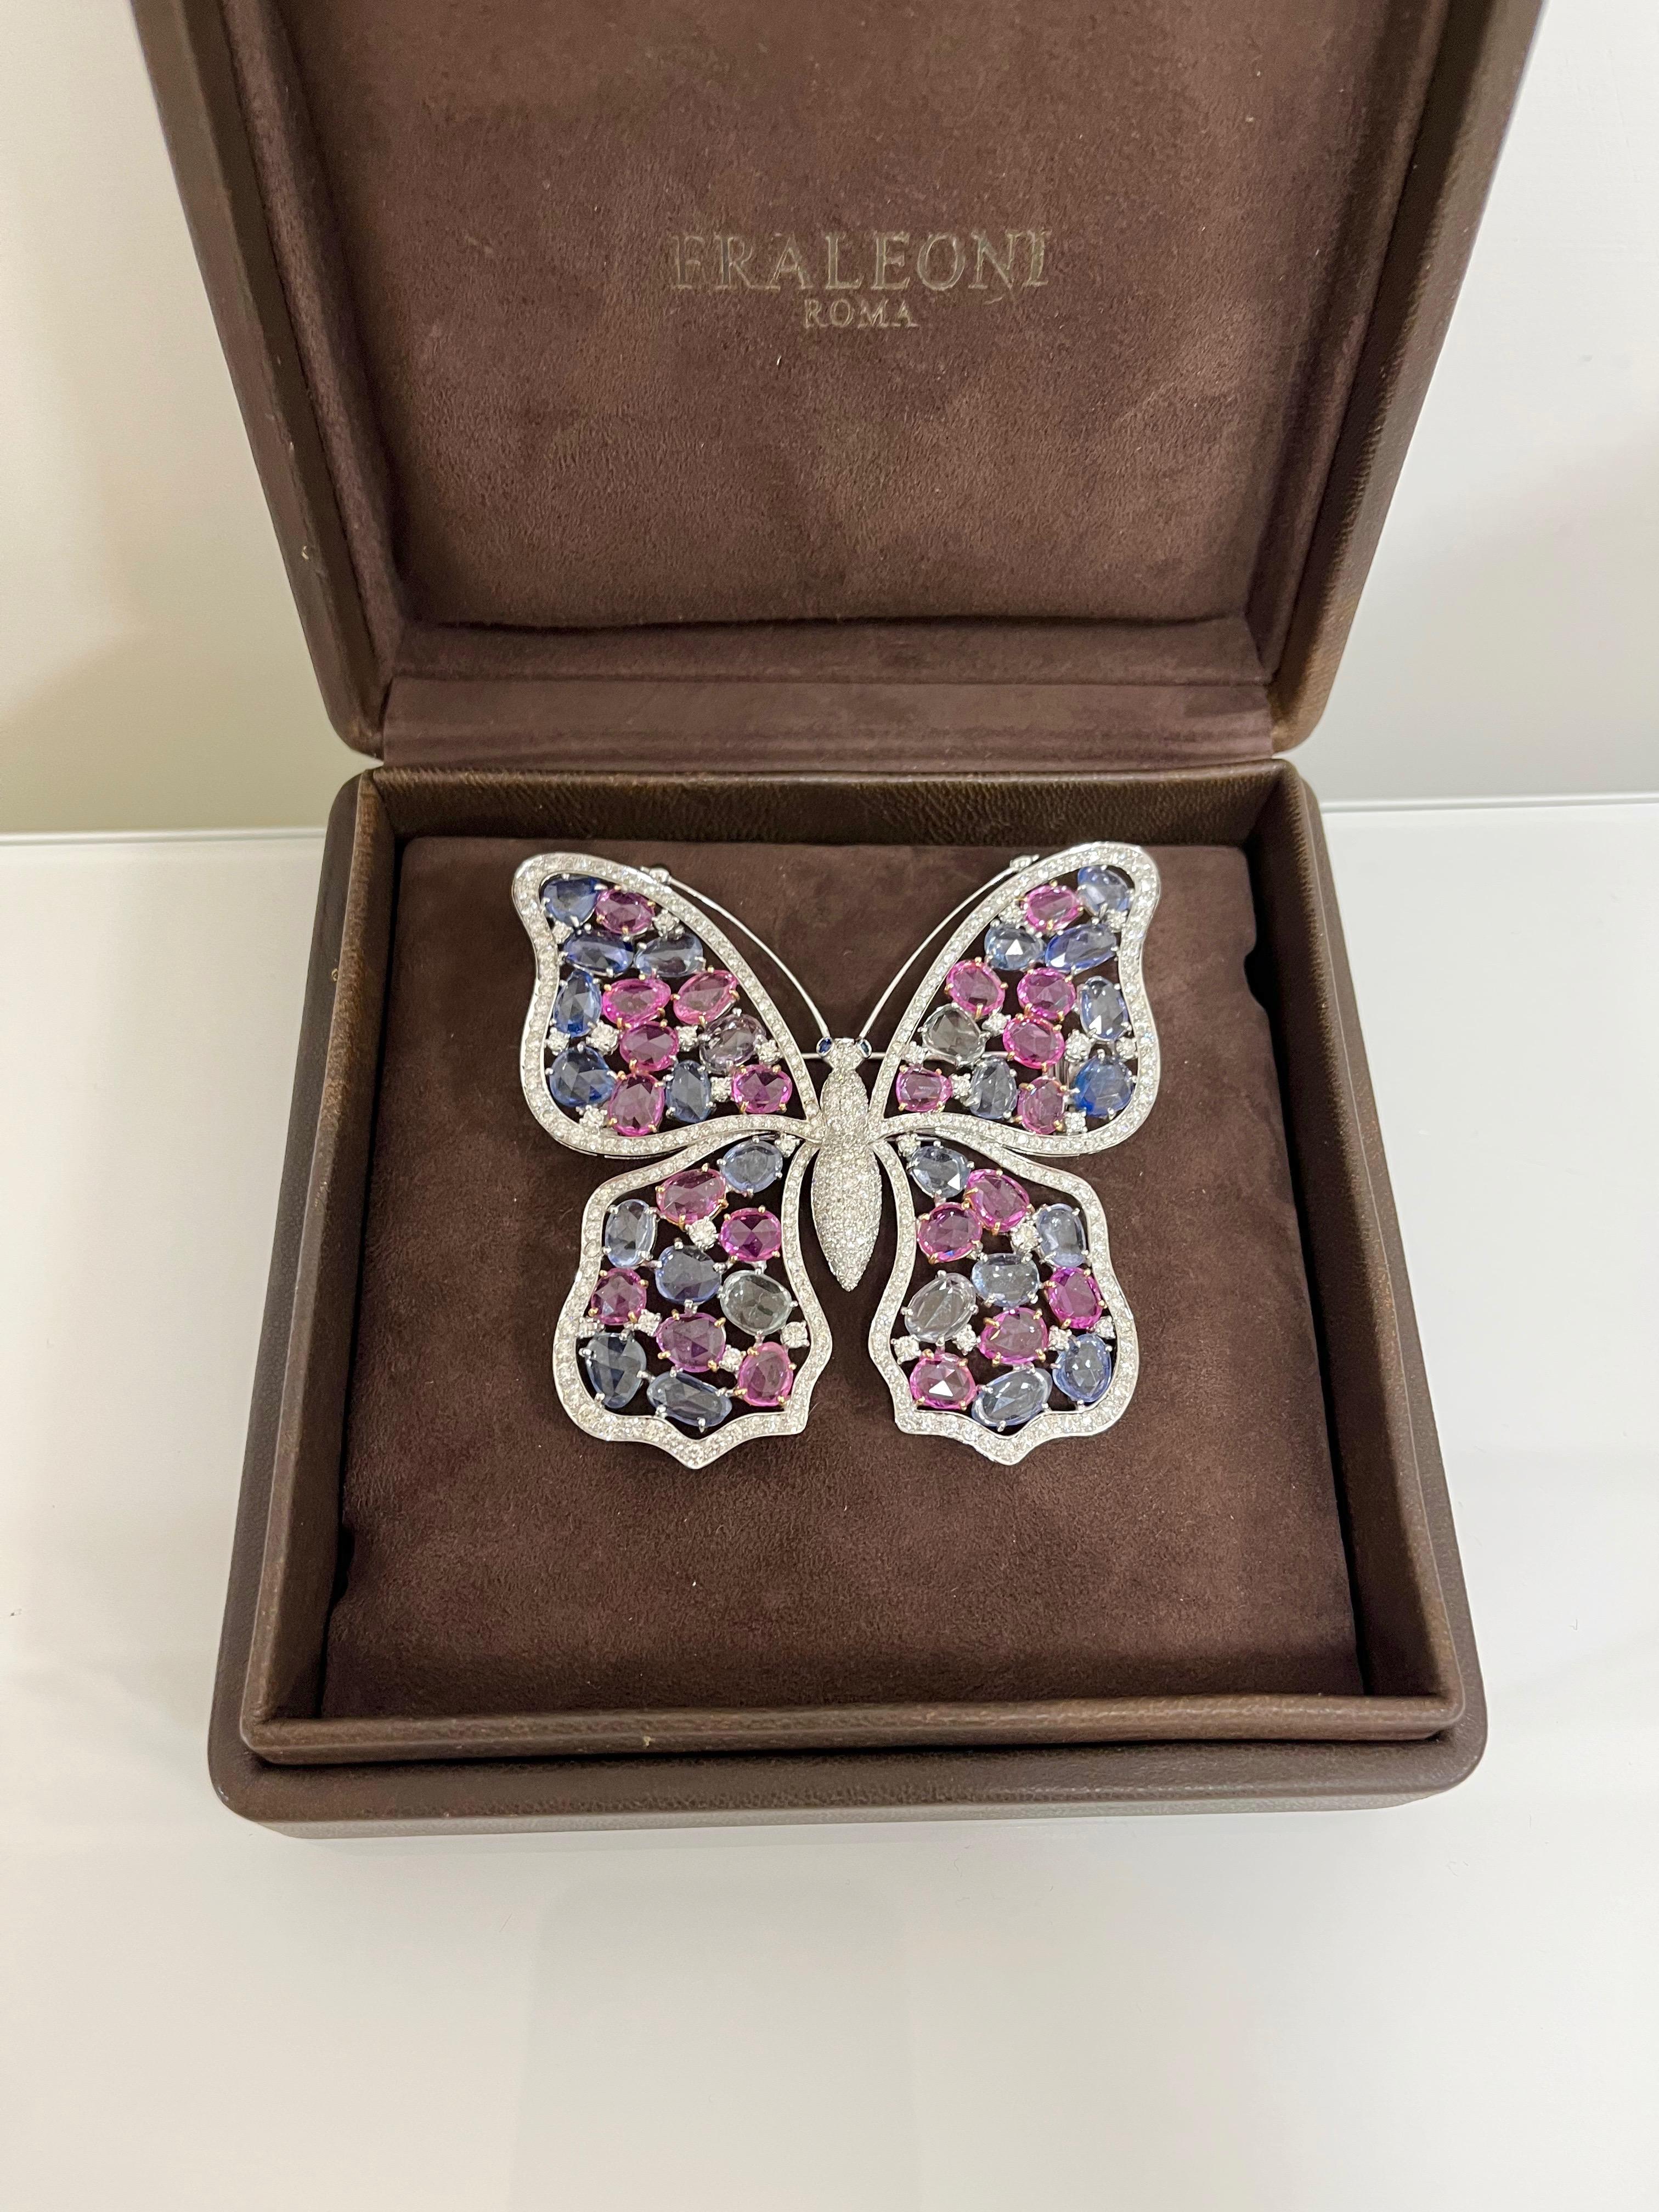 18 kt. white gold brooch with 4.84 carat of round-cut diamonds ( H-I color - VVS1-VVS2 ) and 39.26 carat of double rose-cut blue and pink sapphires.
This one of a kind brooch is hand-made in Italy.
This brooch is designed as a butterfly.
The color